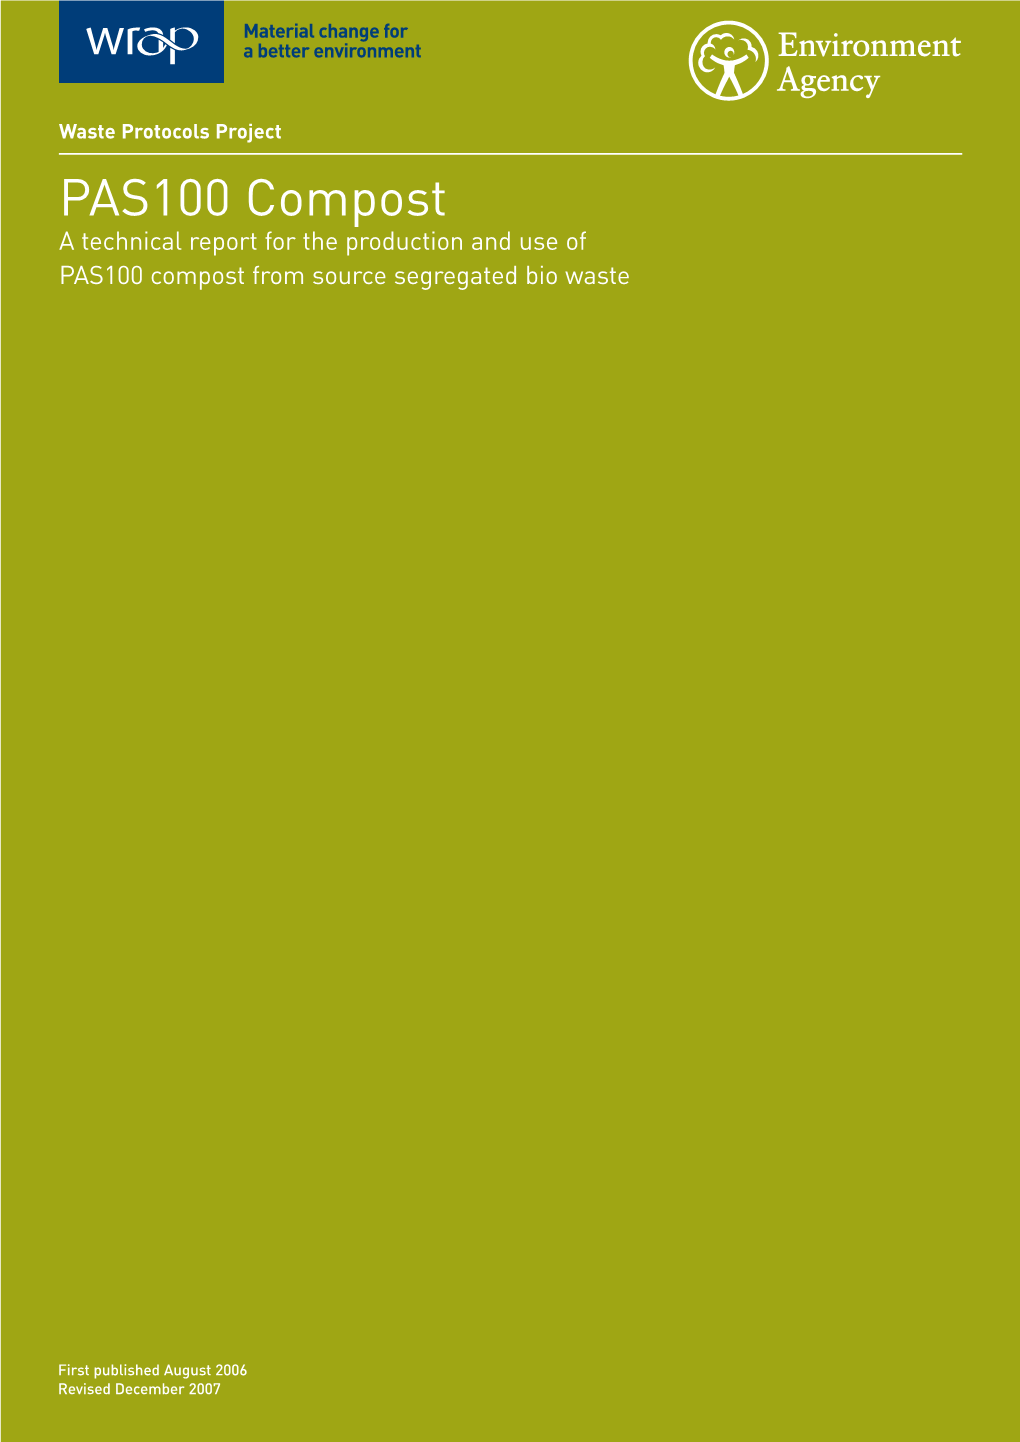 PAS100 Compost a Technical Report for the Production and Use of PAS100 Compost from Source Segregated Bio Waste